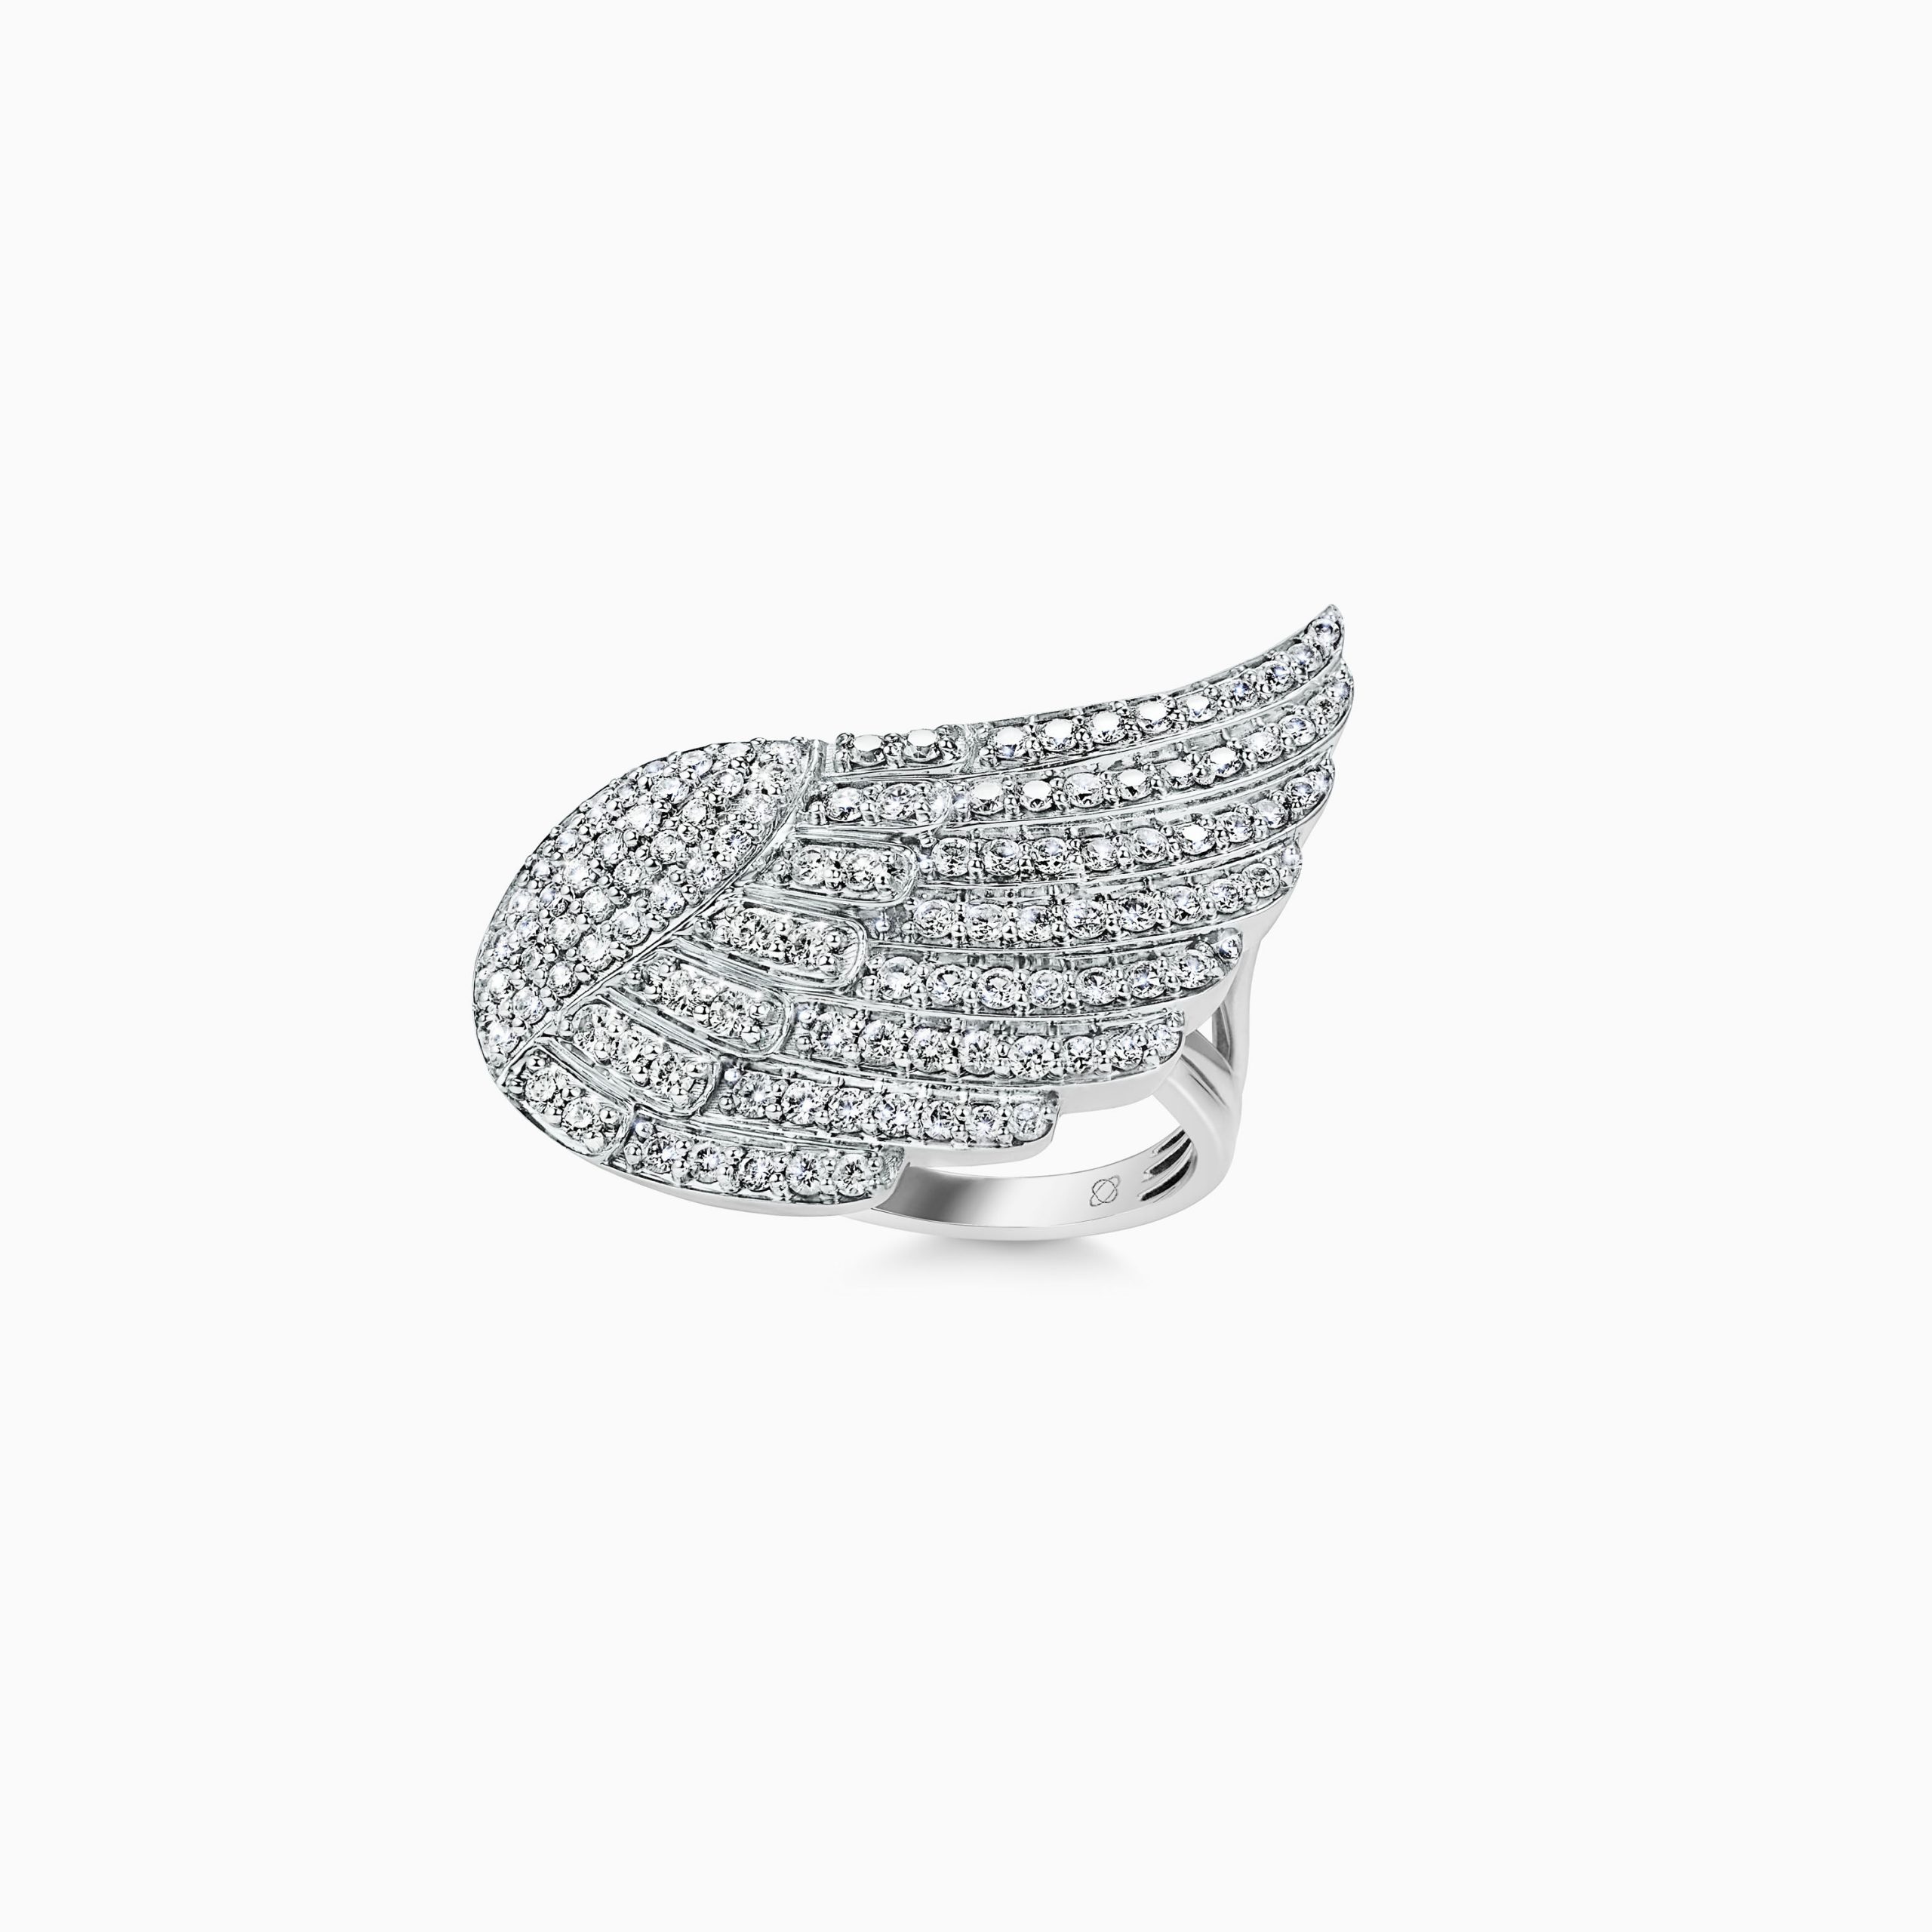 The Brahe wing ring - Ebba Brahe